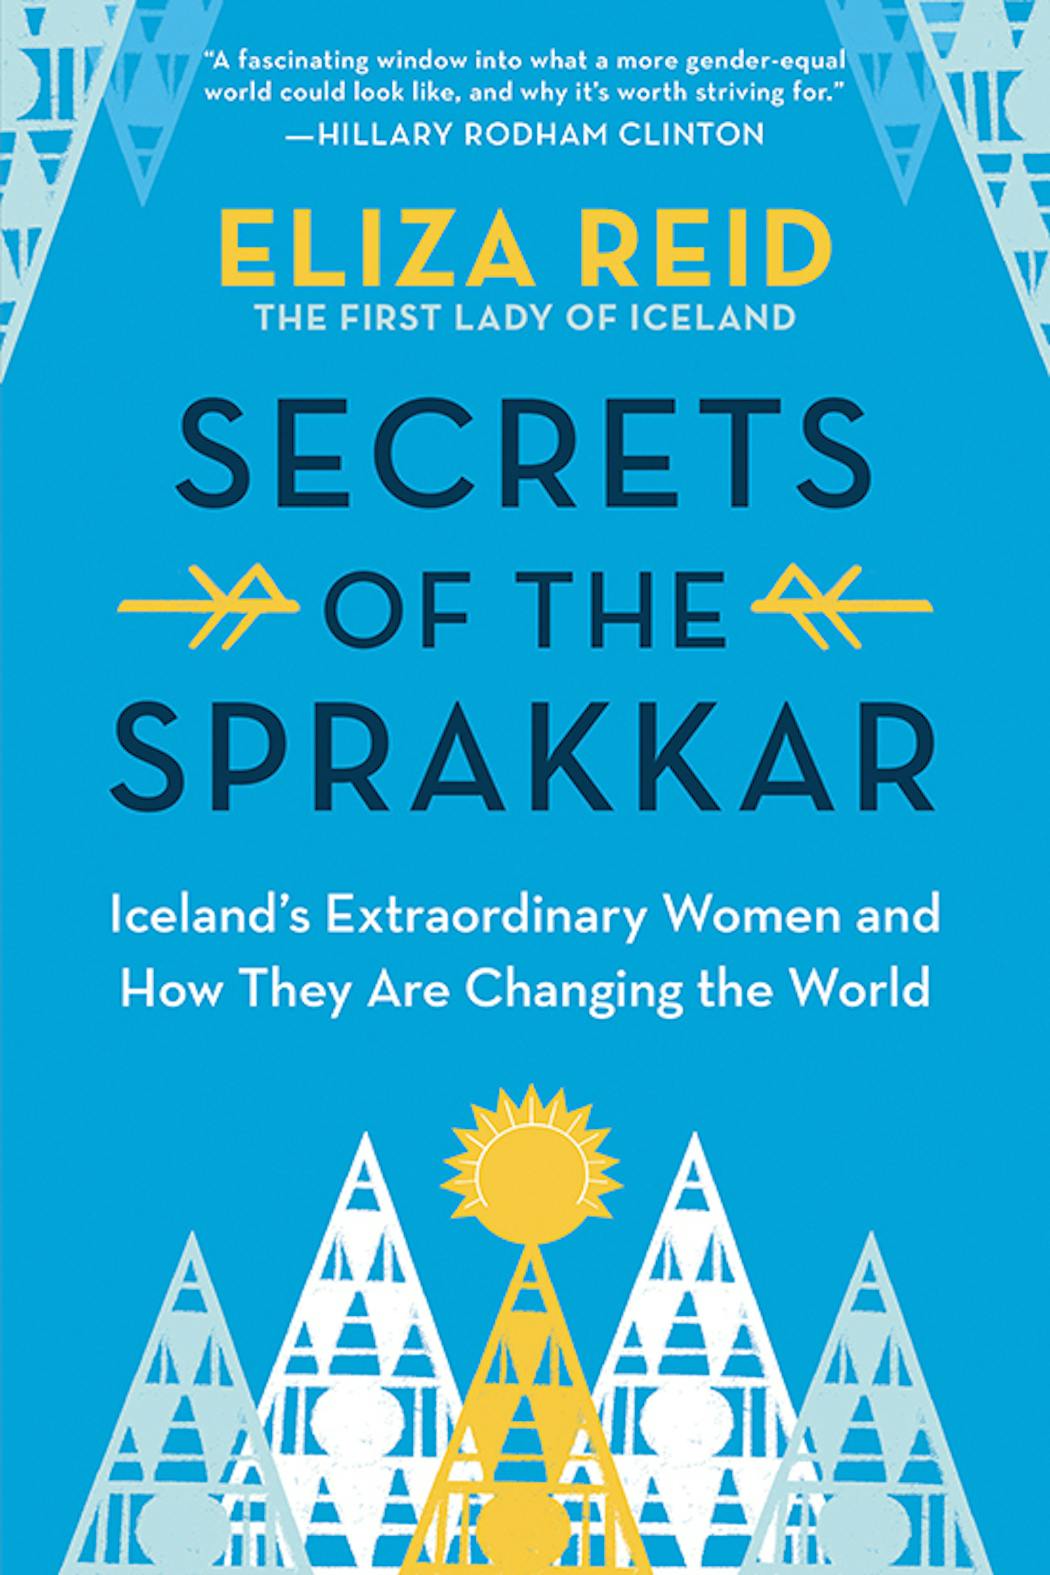 “Secrets of the Sprakkar: Iceland’s Extraordinary Women and How They Are Changing the World” by Eliza Reid